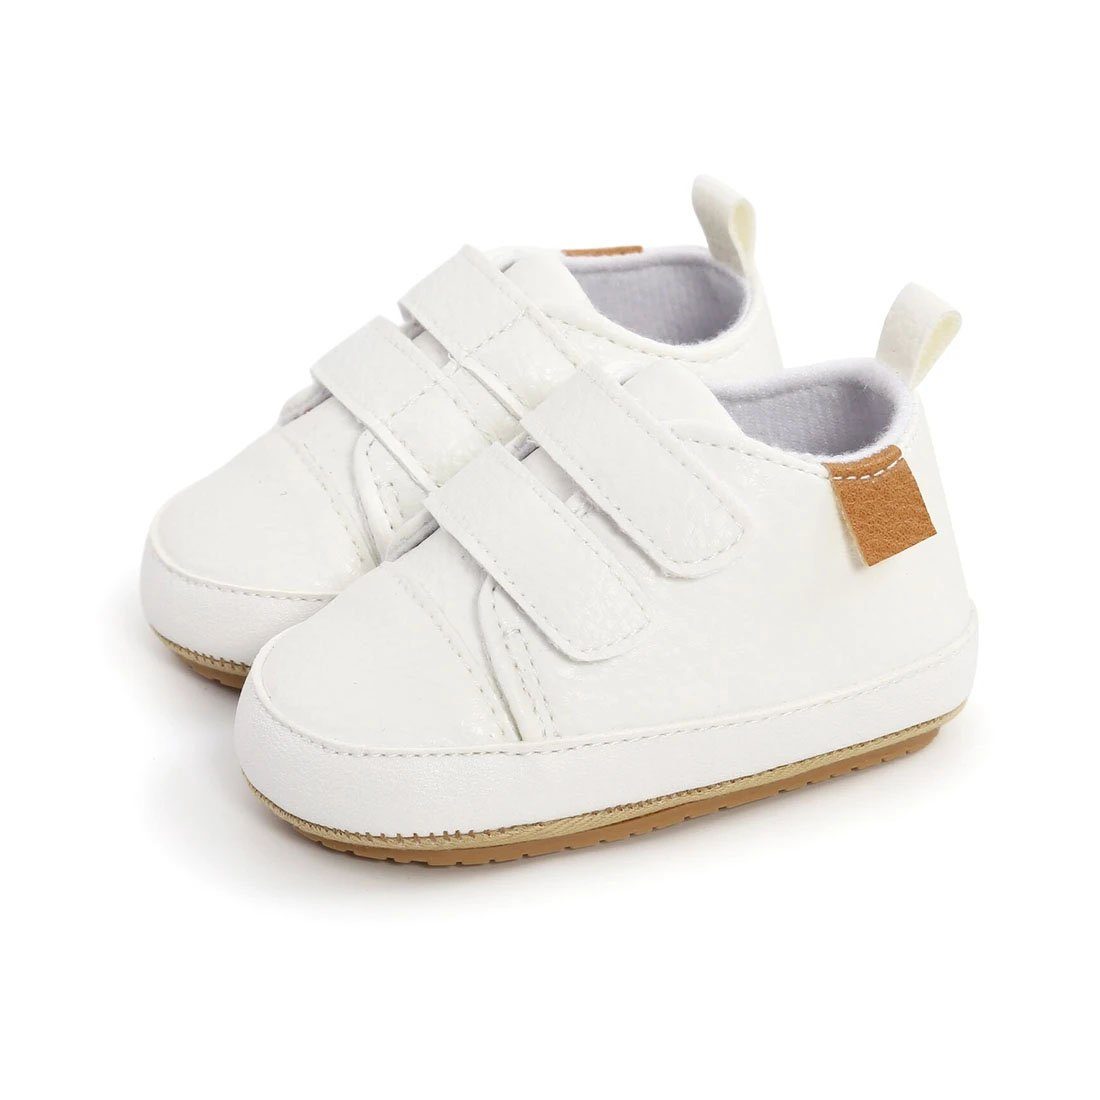 Buckle Strap Solid Baby Shoes